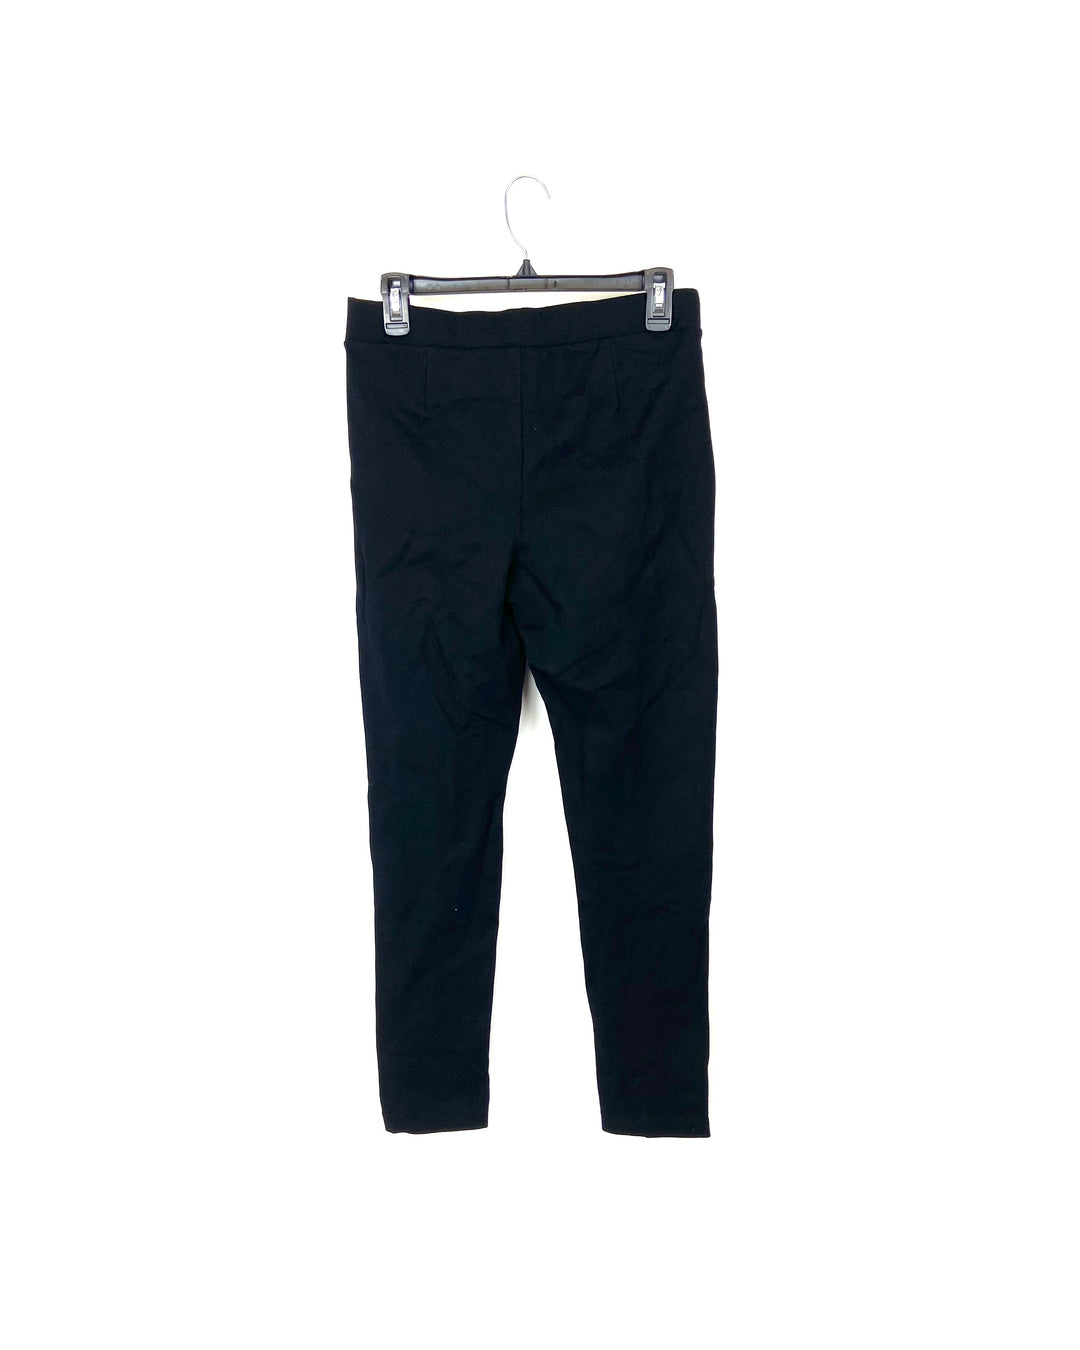 Black Fitted Pants - Small